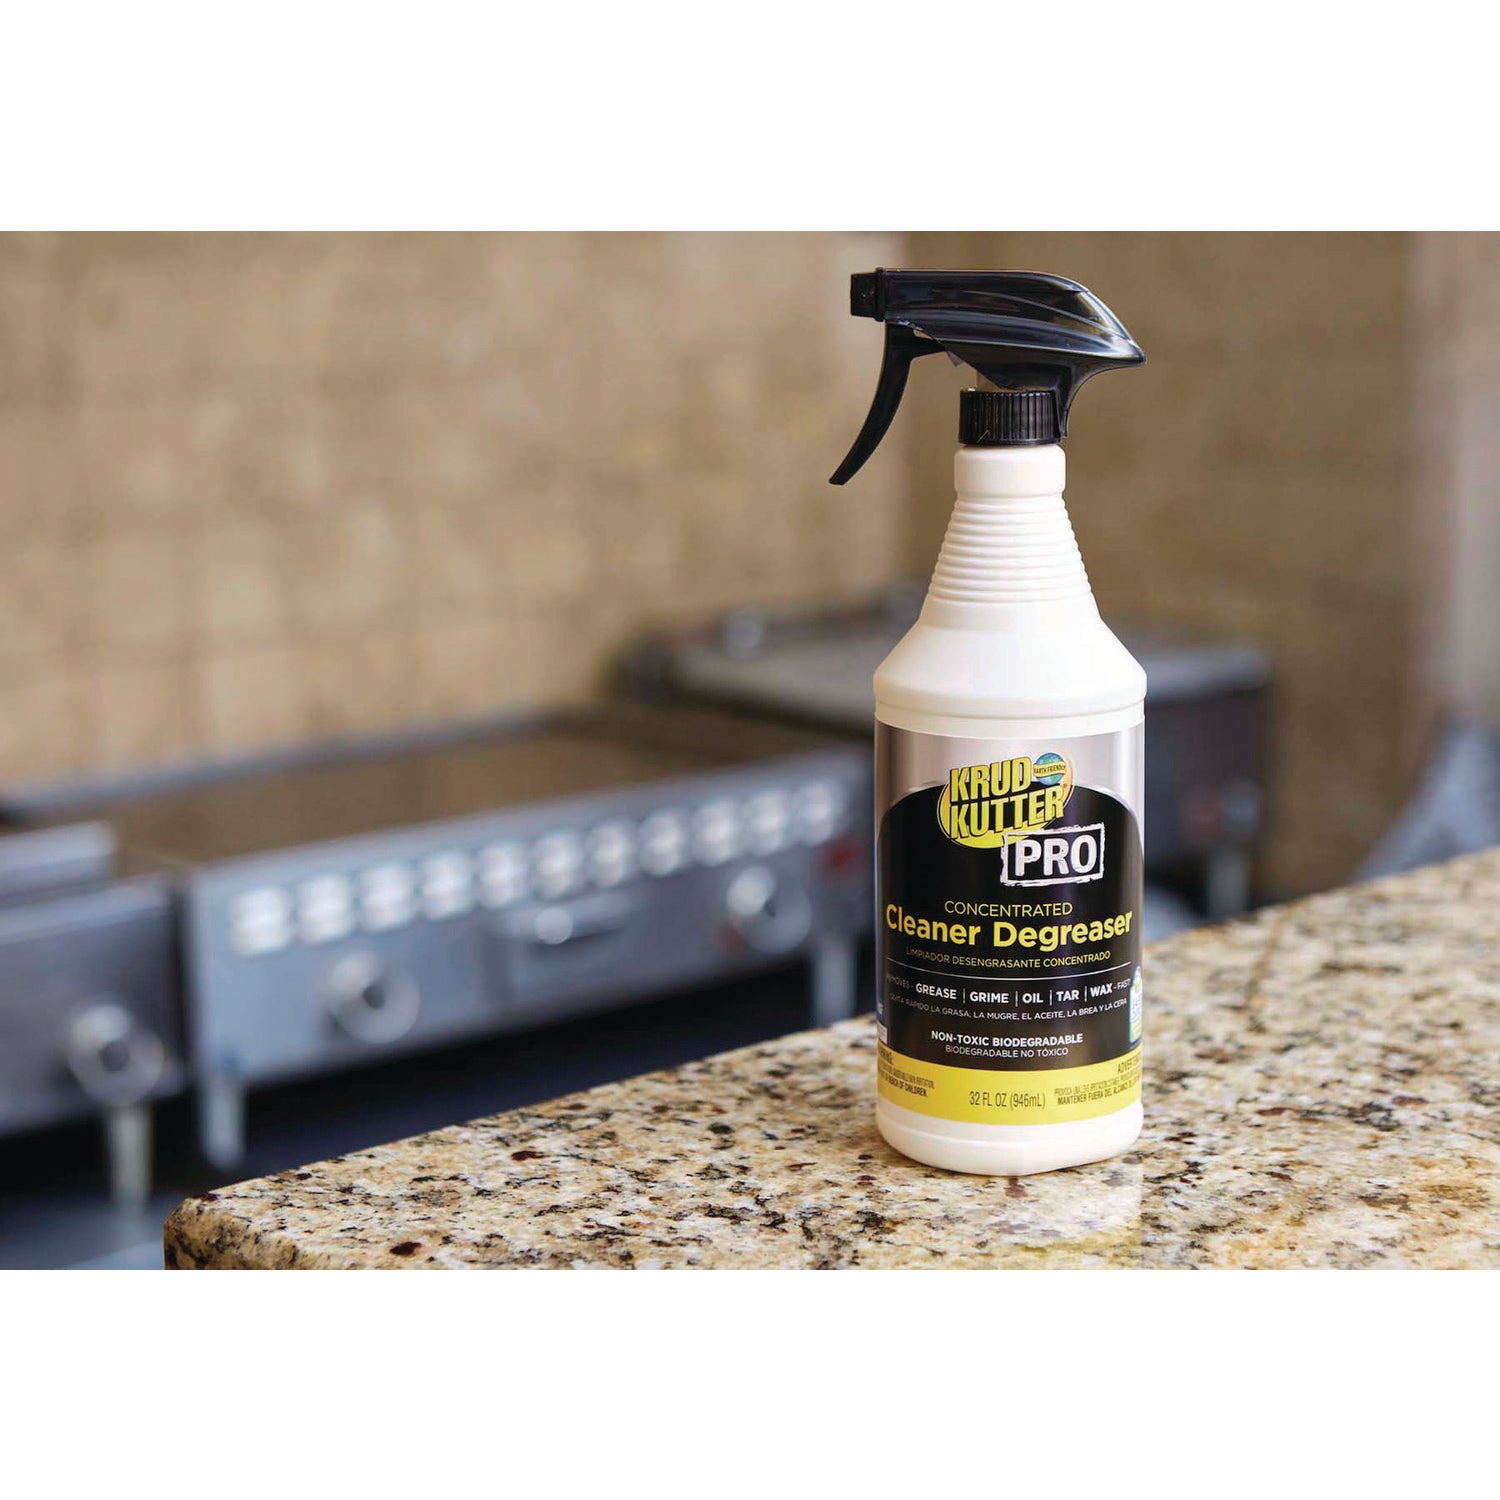 Krud Kutter Pro Cleaner Degreaser - Concentrate - 32 oz (2 lb) - 1 Each - Heavy Duty, Chemical-free, Residue-free - Clear - 2